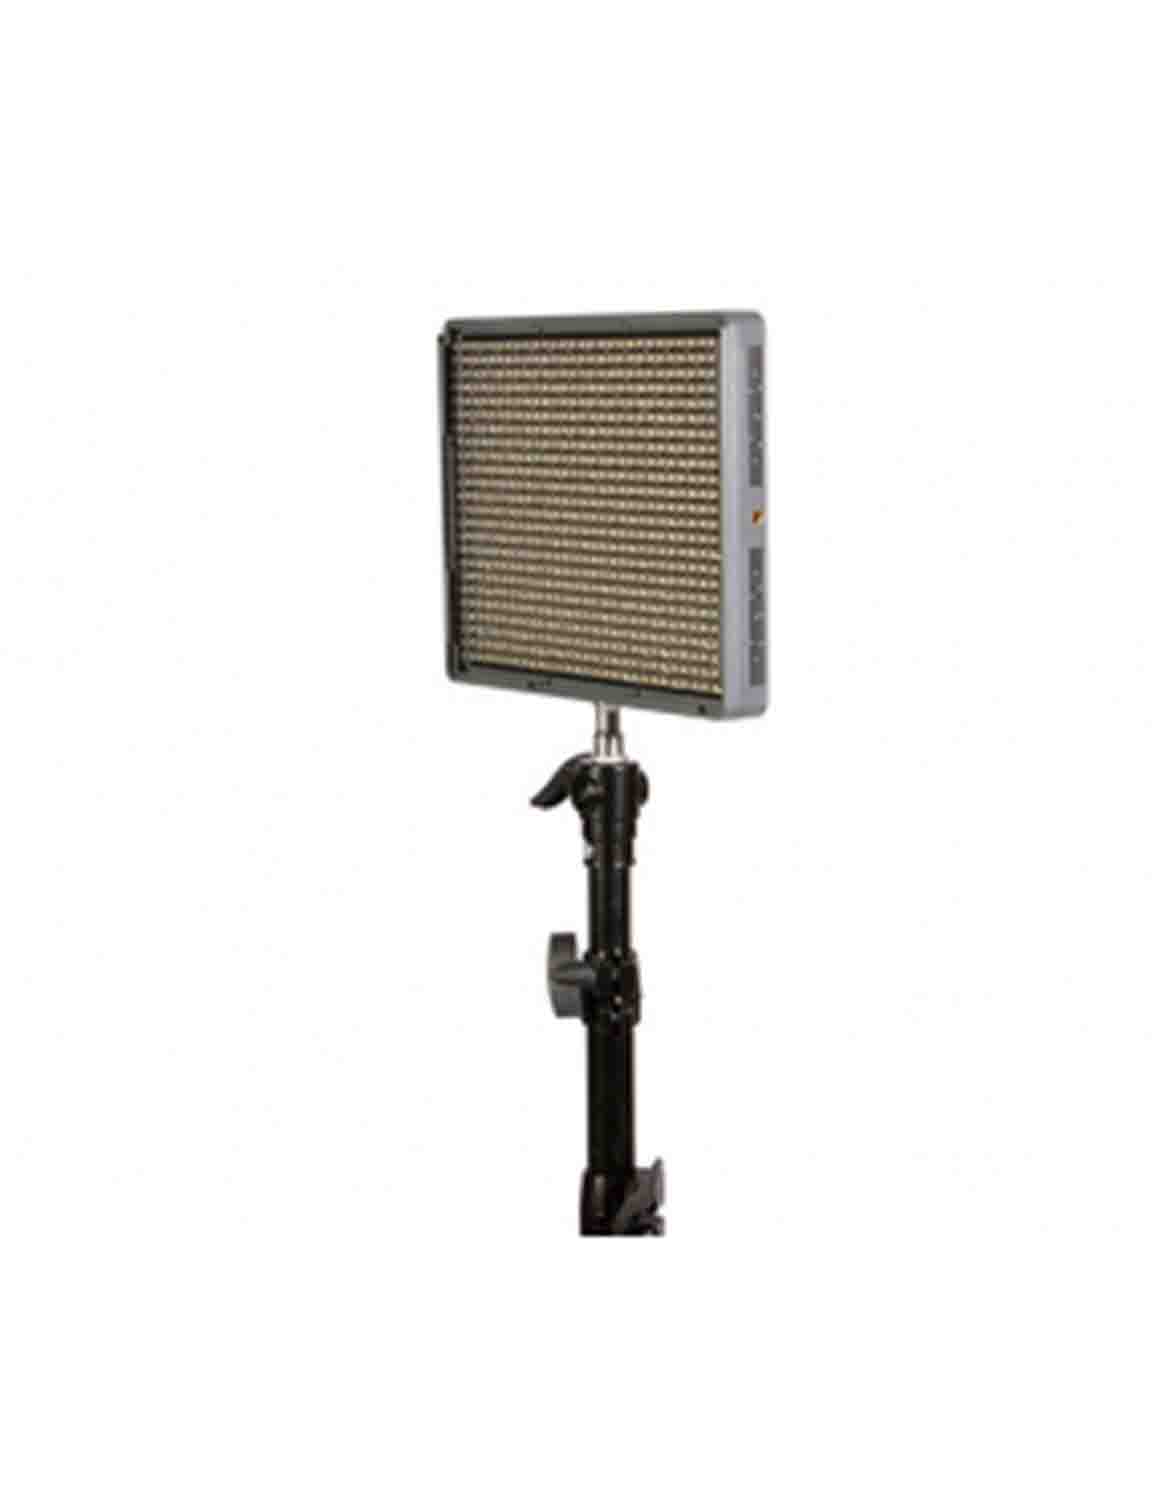 Onstage LS-MS7620, 13 Inch Tripod Lighting and Mic Stand - Hollywood DJ